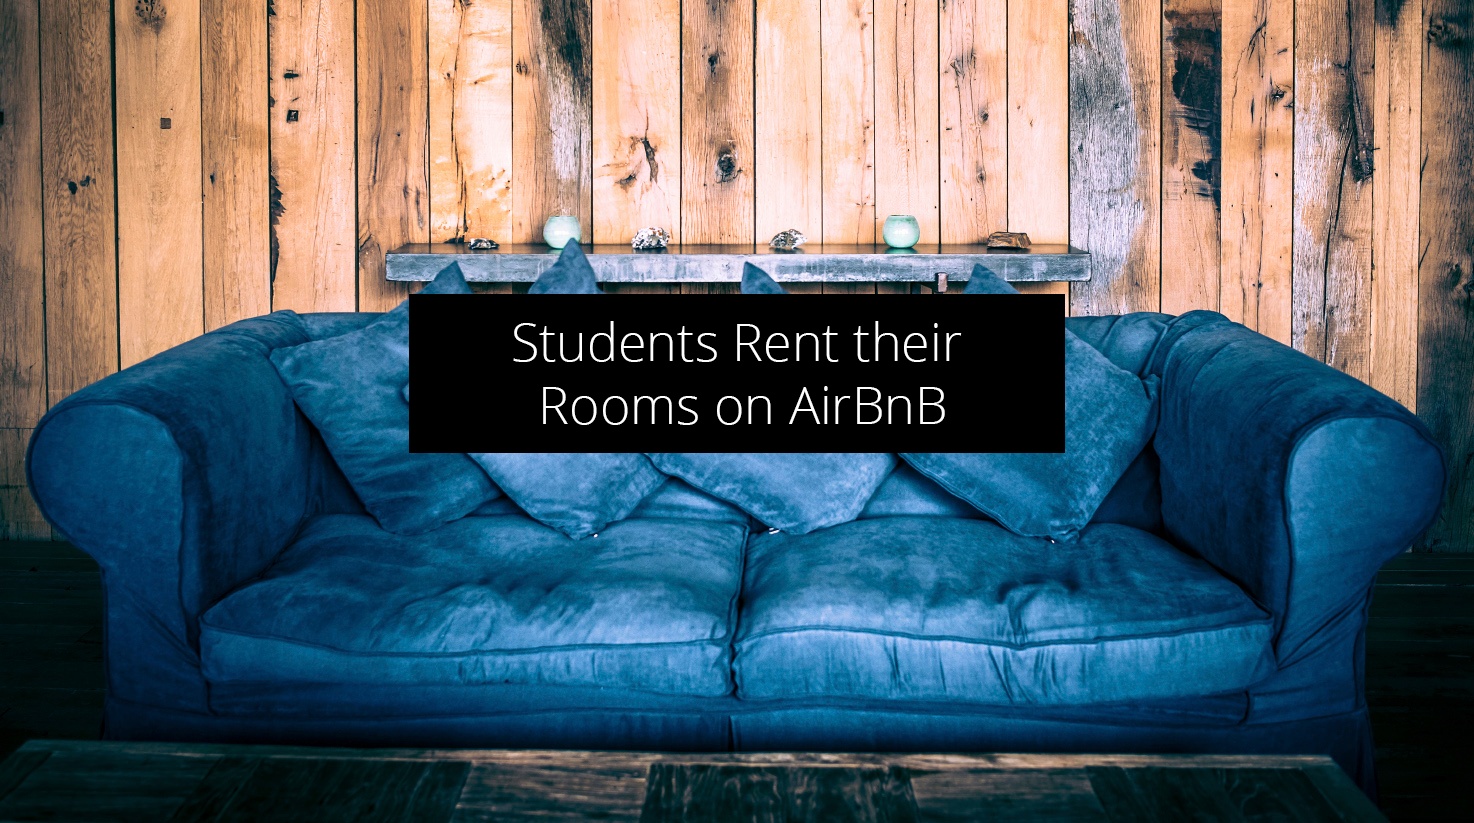 student_rent_room_on_airbnb.jpg